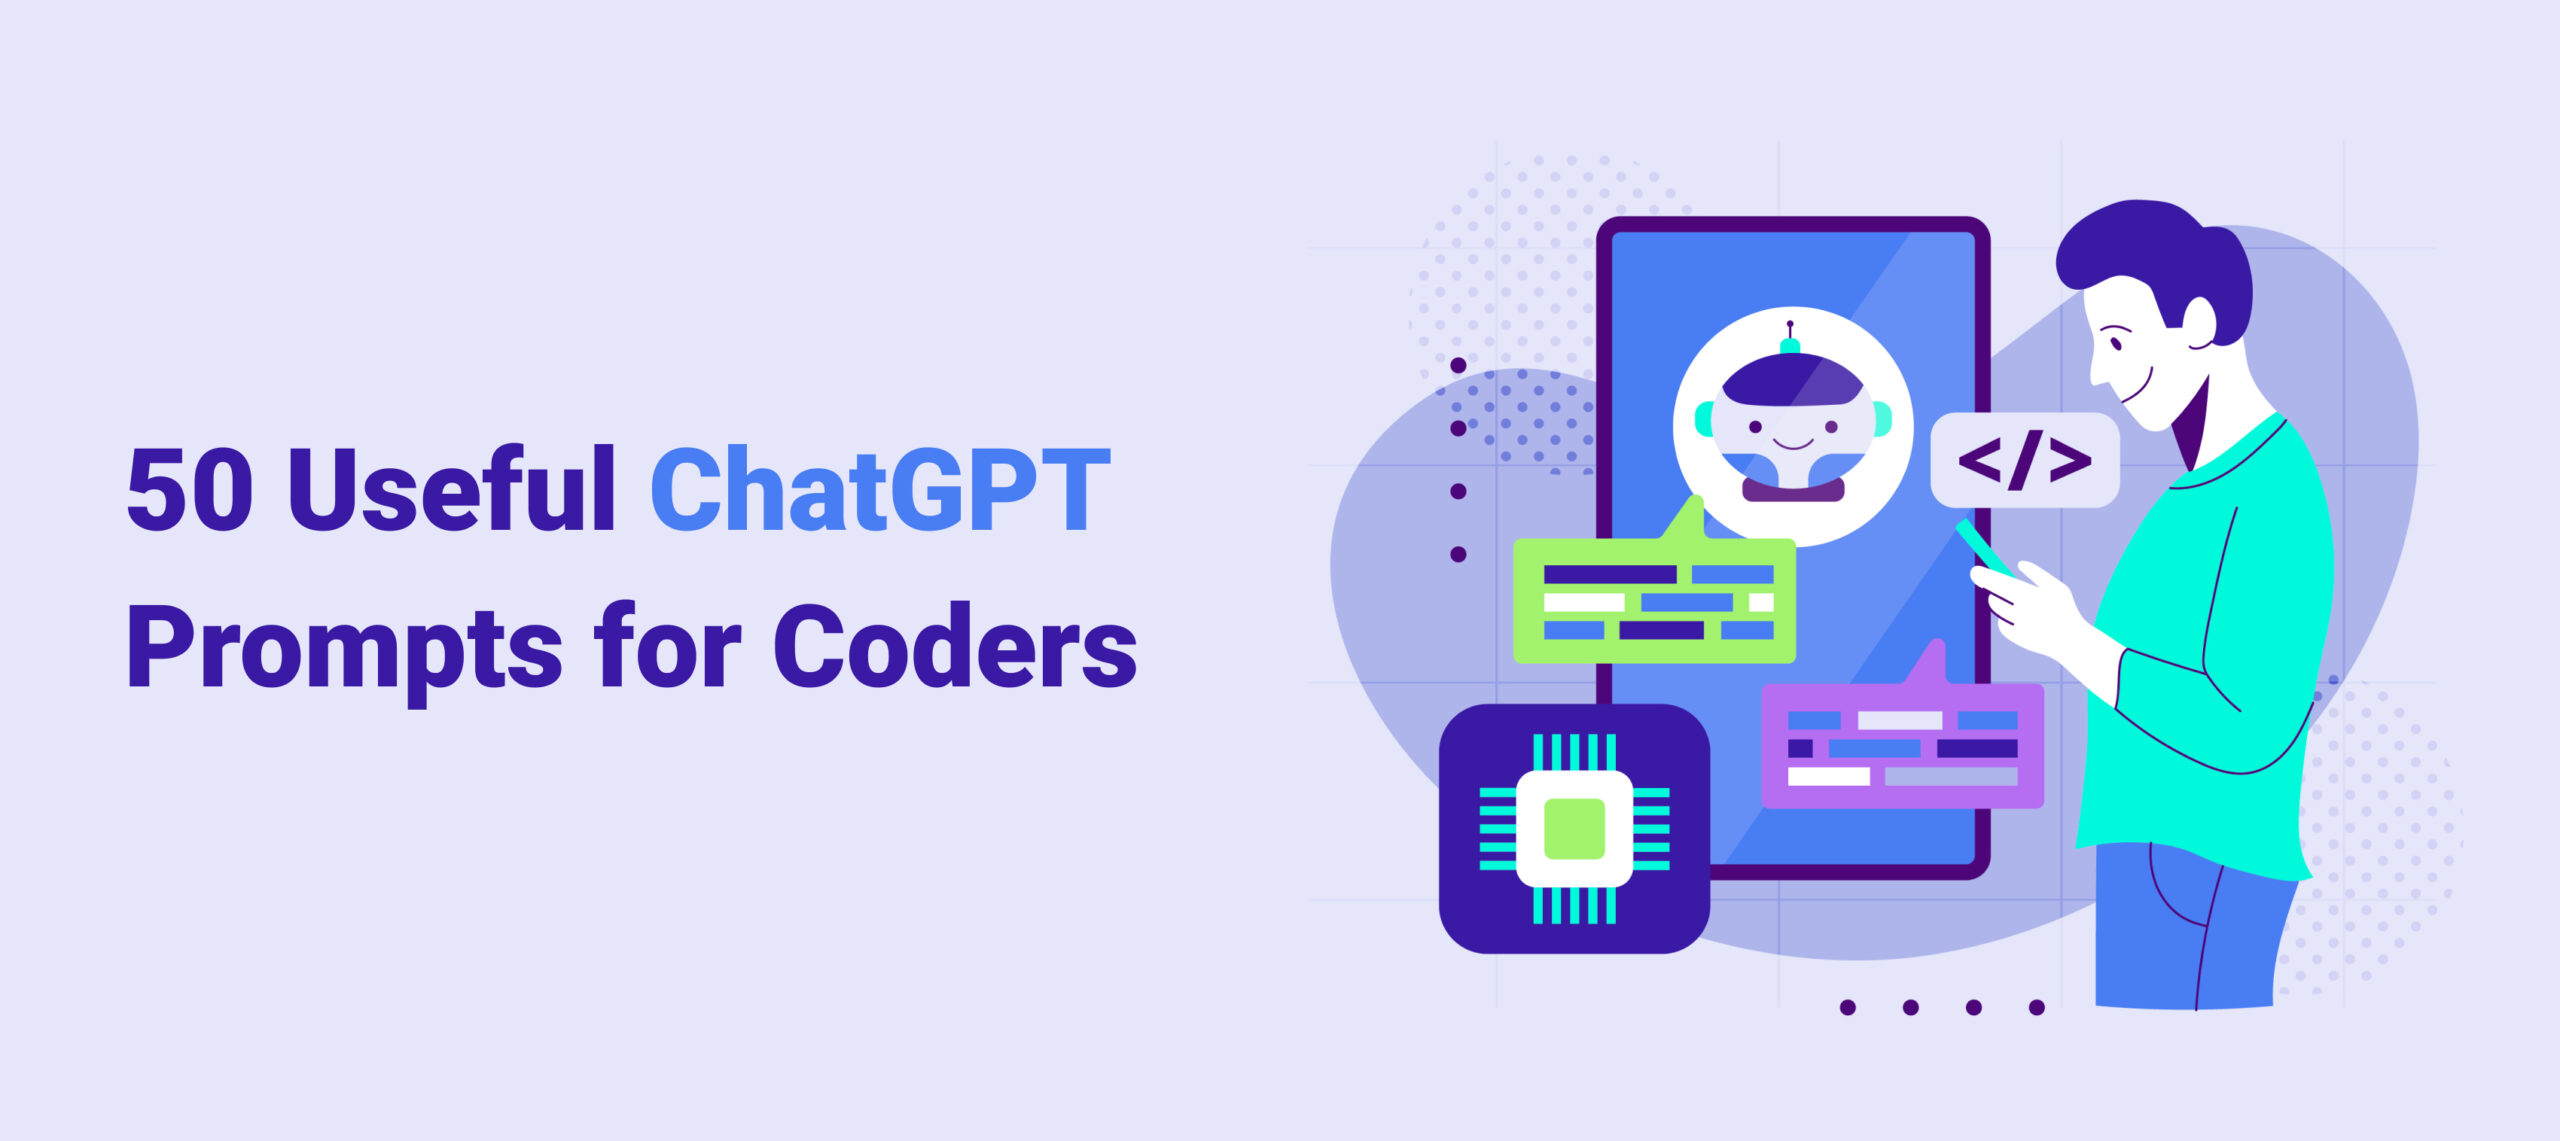  50 Useful ChatGPT Prompts for Coders